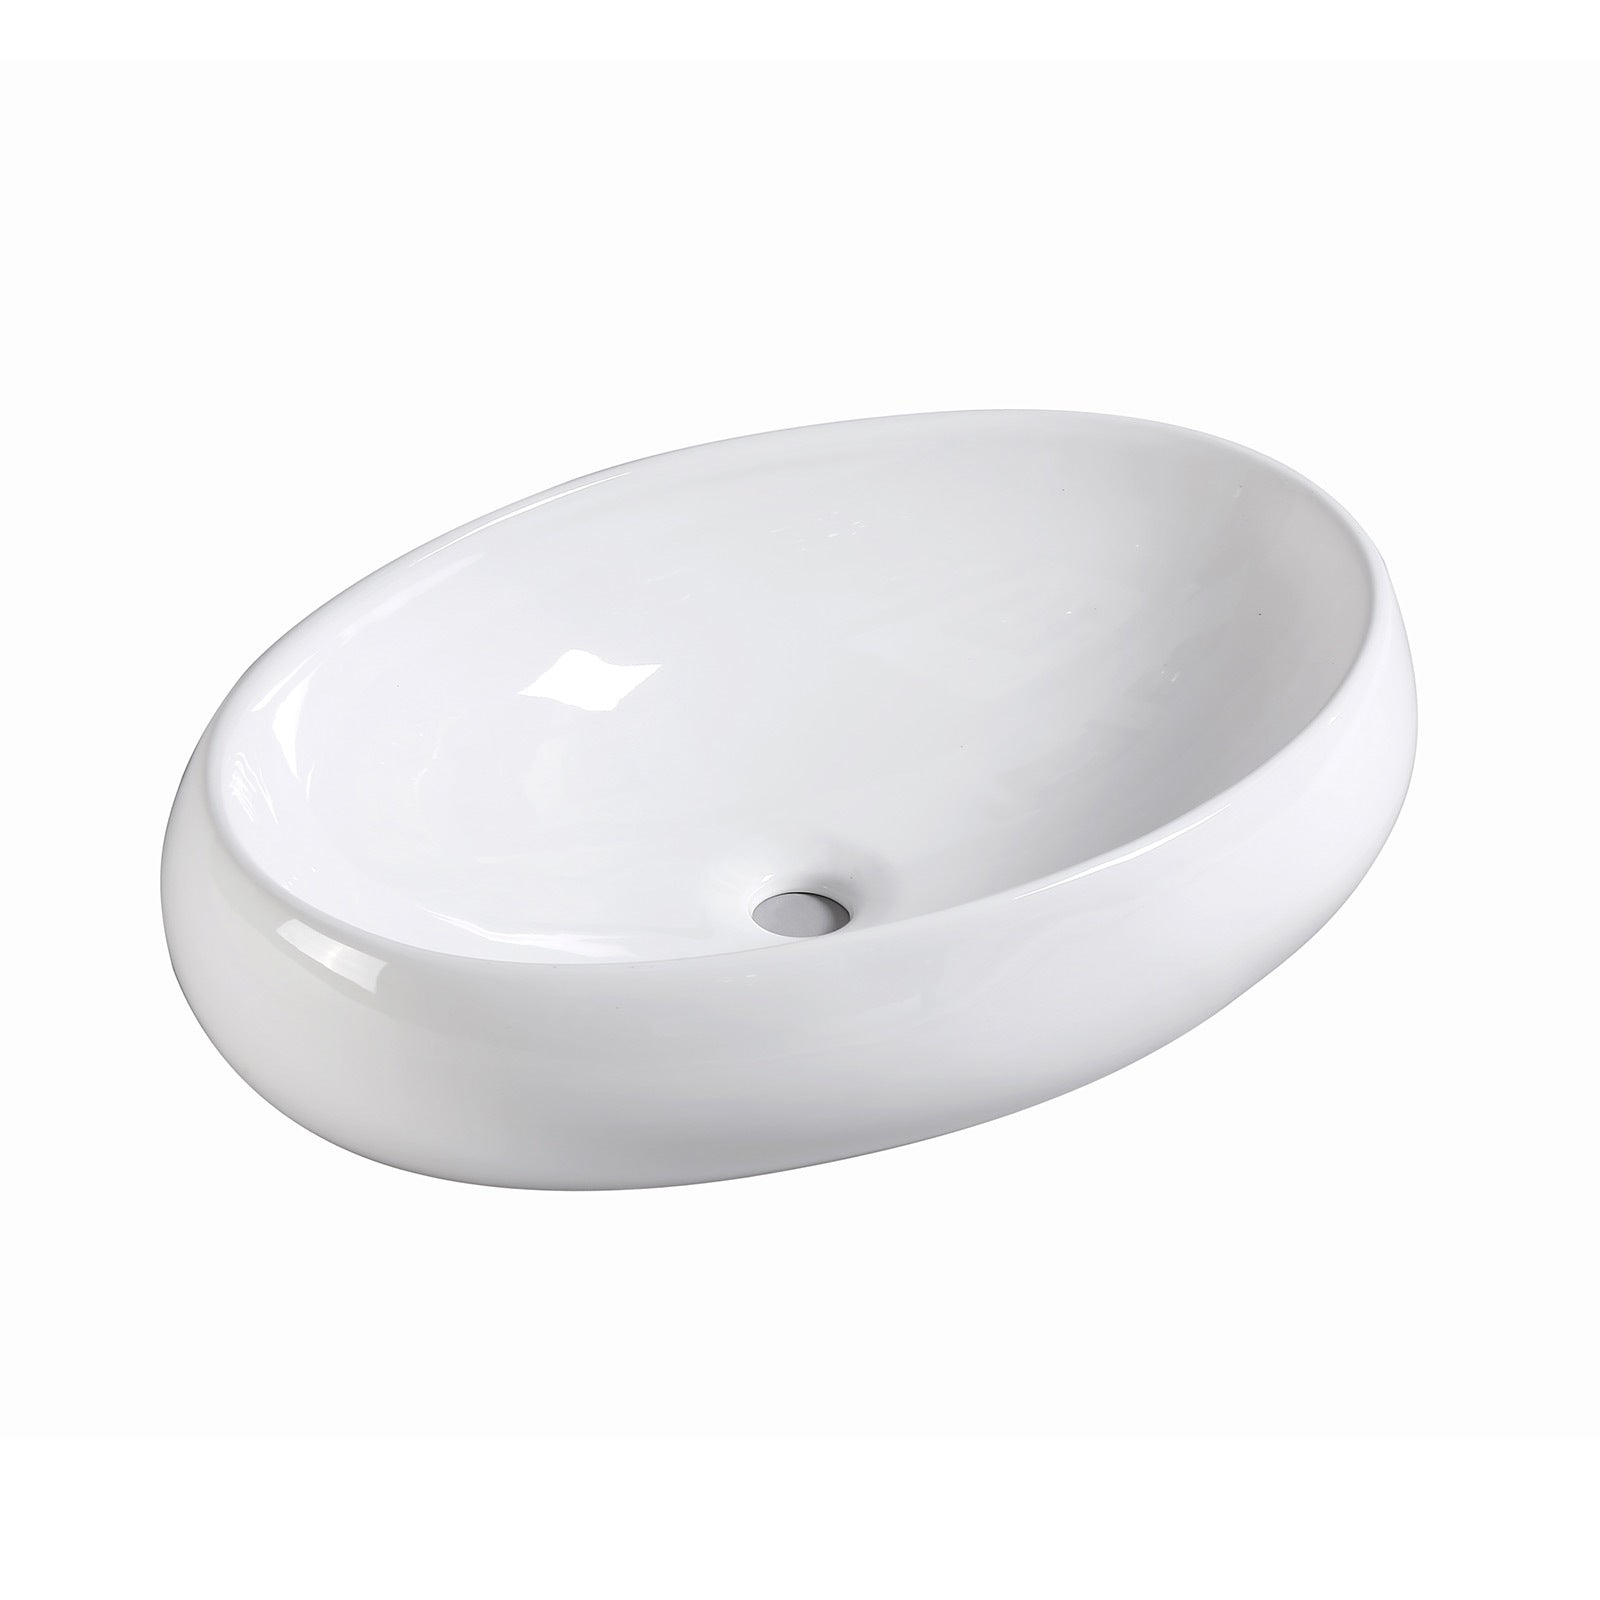 Muriel 59 x 40 14.5cm White Ceramic Bathroom Basin Vanity Sink Oval Above Counter Top Mount Bowl Accessories Fast shipping On sale